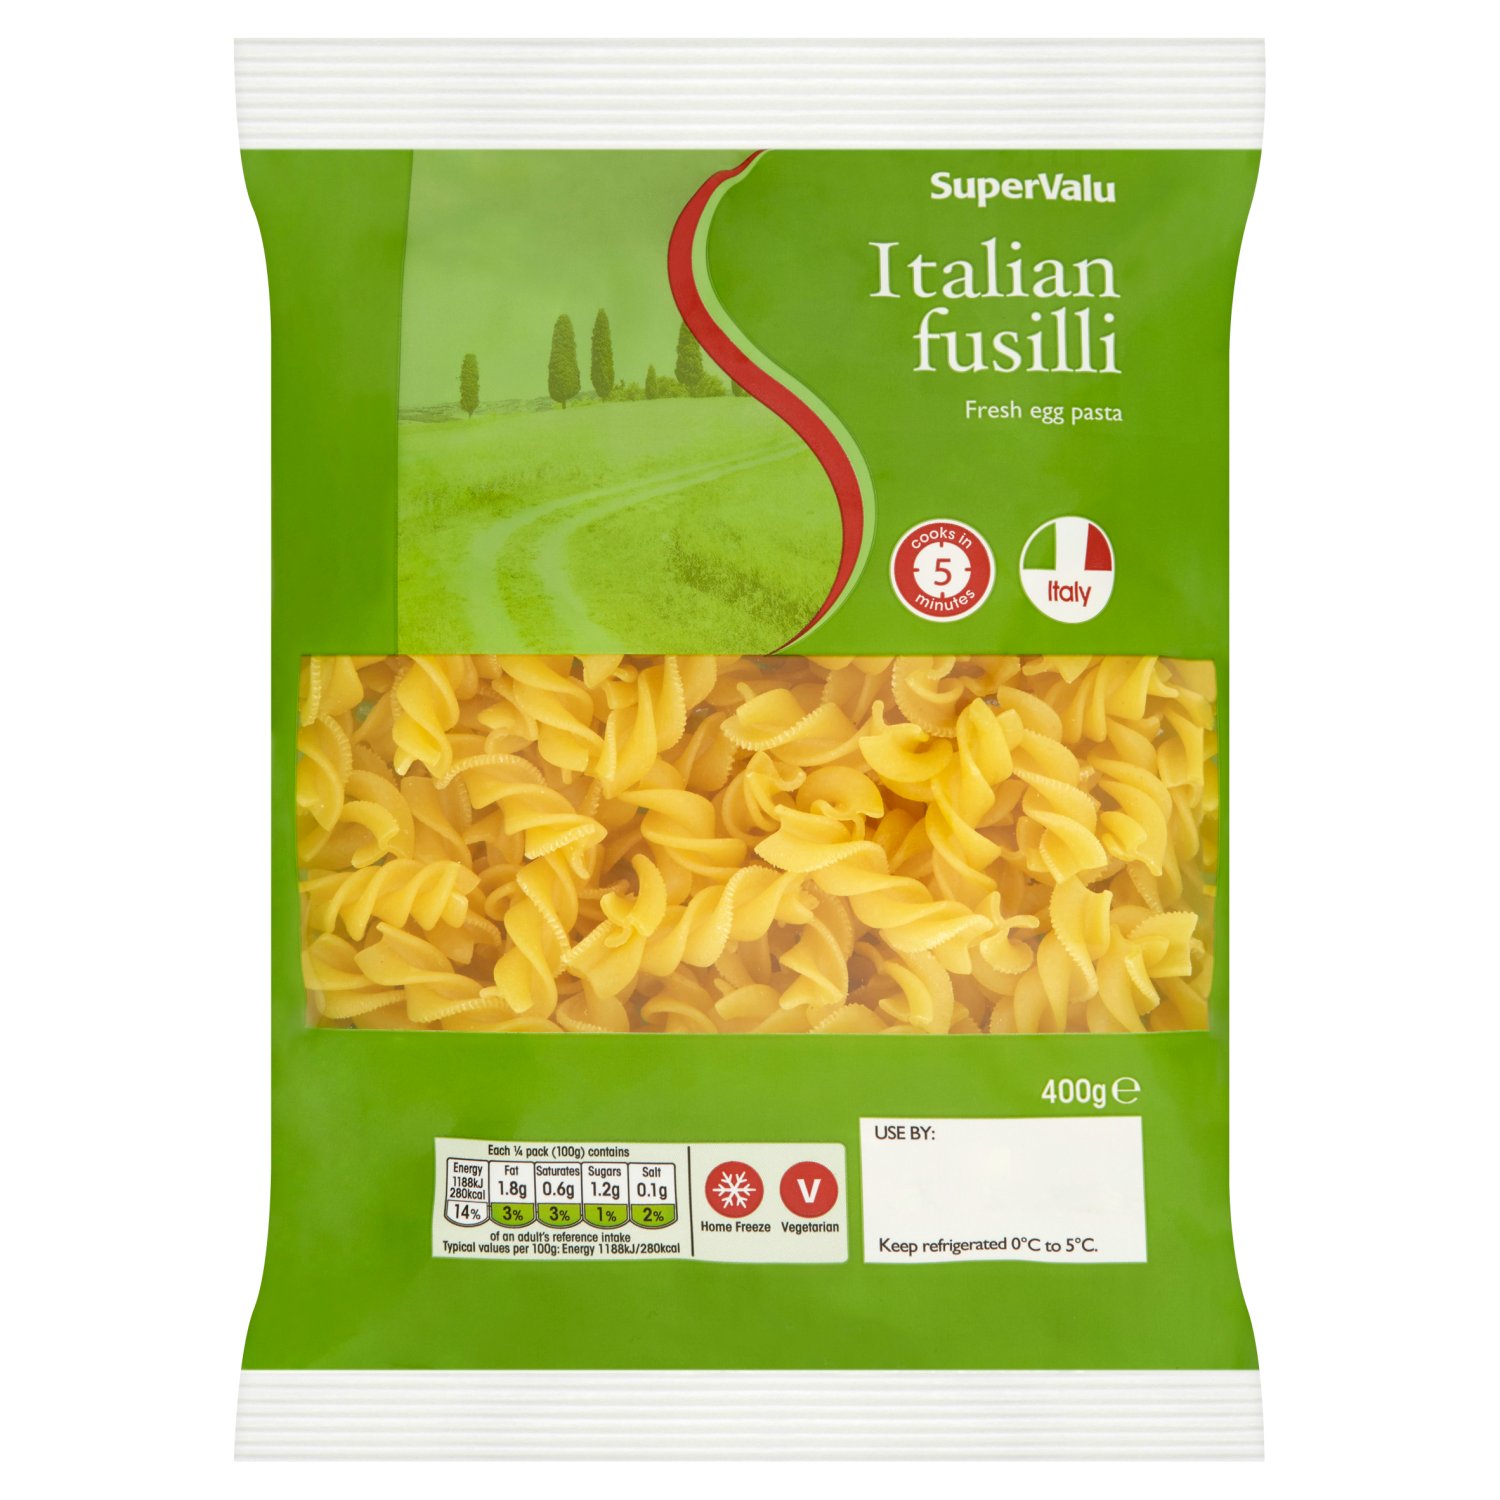 Fusilli
Enjoy a fresh, authentic Italian pasta made with only the finest ingredients. Using premium durum wheat and fresh eggs, SuperValu has created a perfect pasta for every occasion.